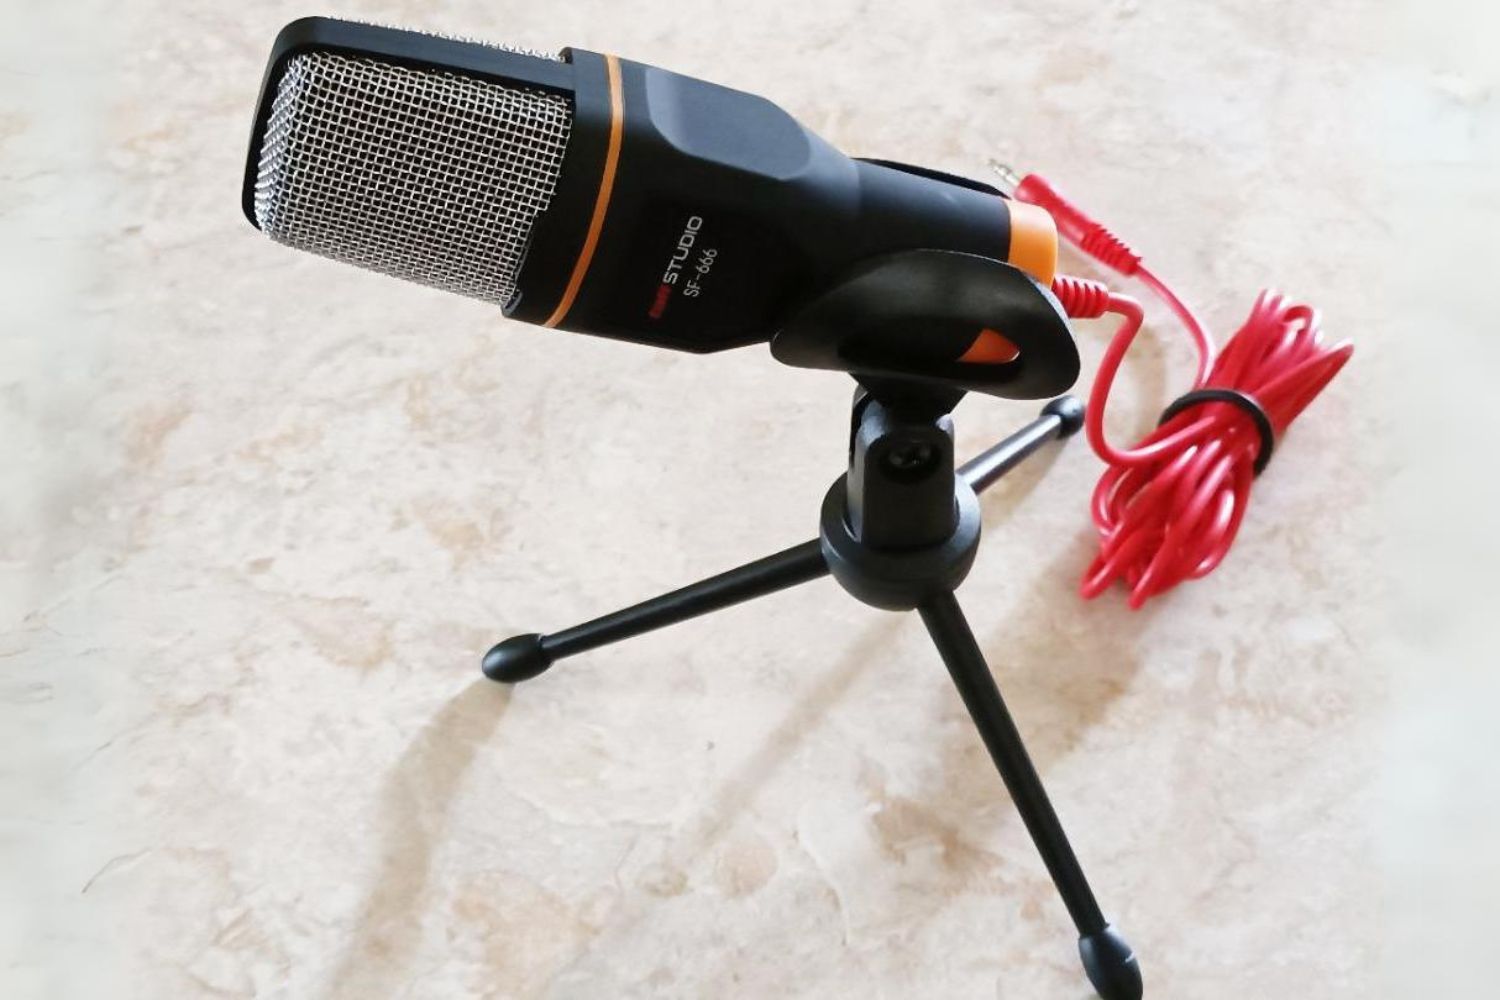 sunjet-condenser-microphone-with-tripod-stand-how-to-turn-it-on